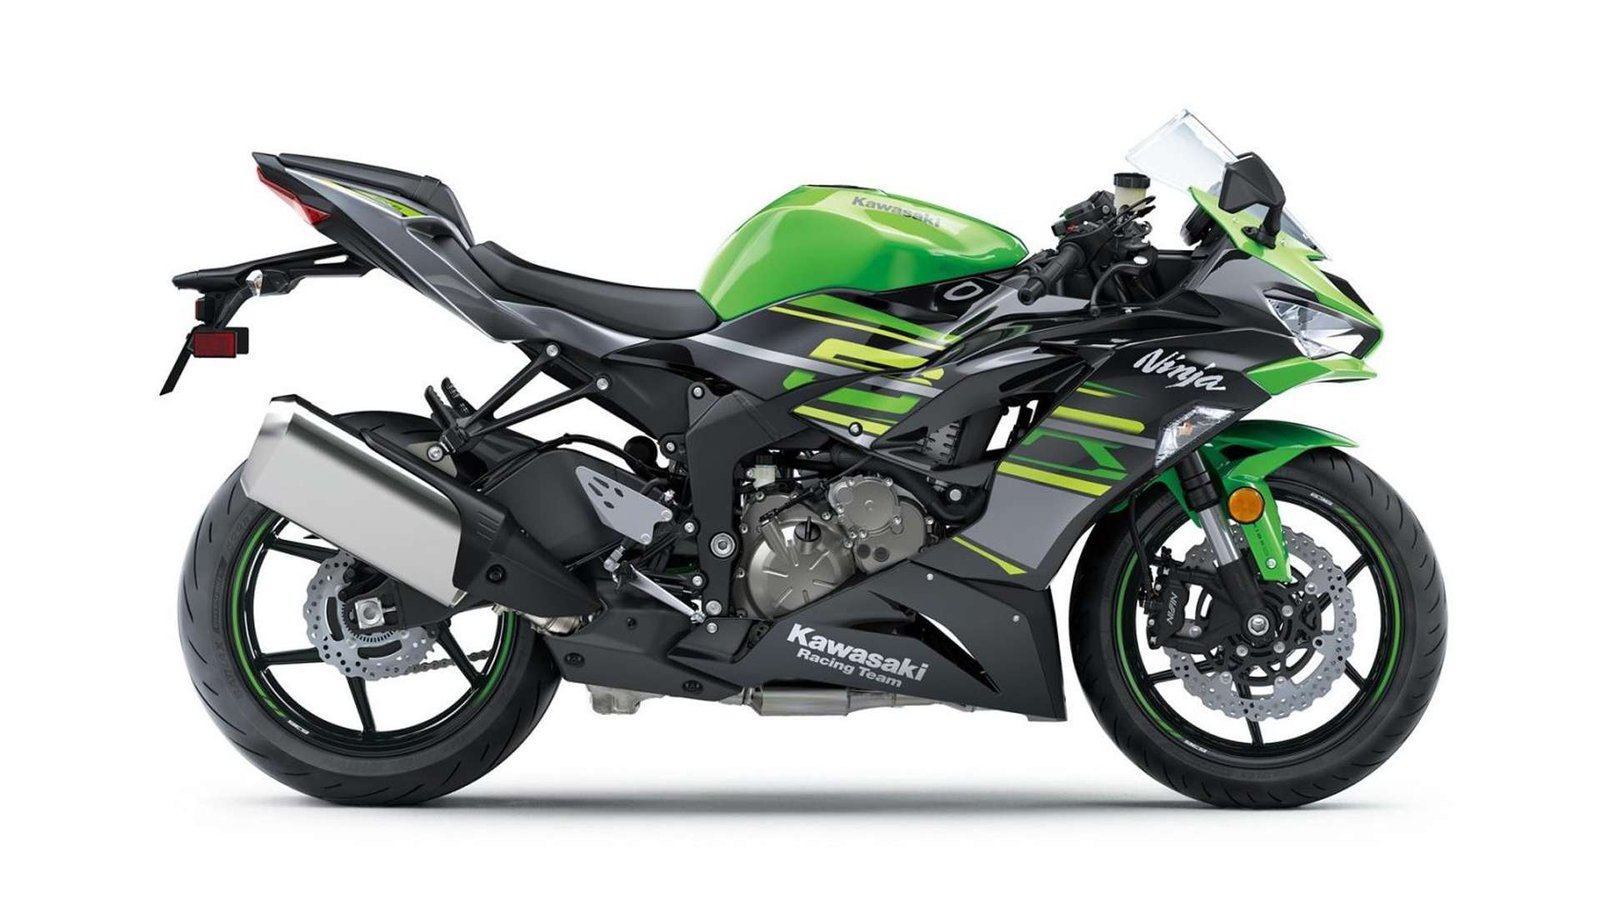 The Launch of the Kawasaki Ninja Zx-6R in India Is Scheduled for January 1